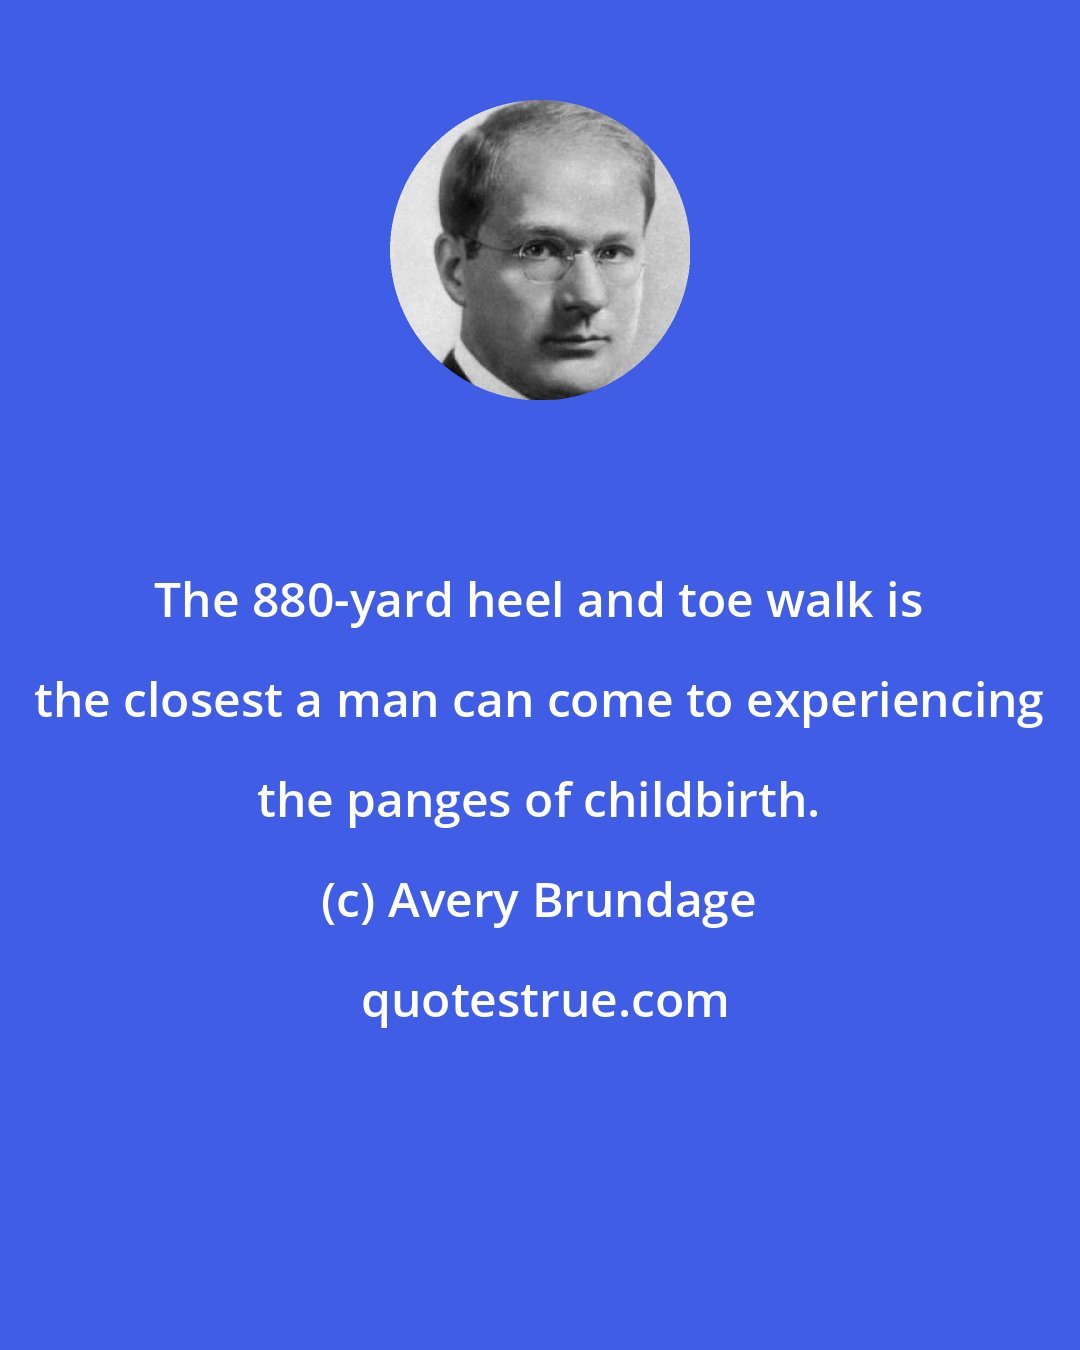 Avery Brundage: The 880-yard heel and toe walk is the closest a man can come to experiencing the panges of childbirth.